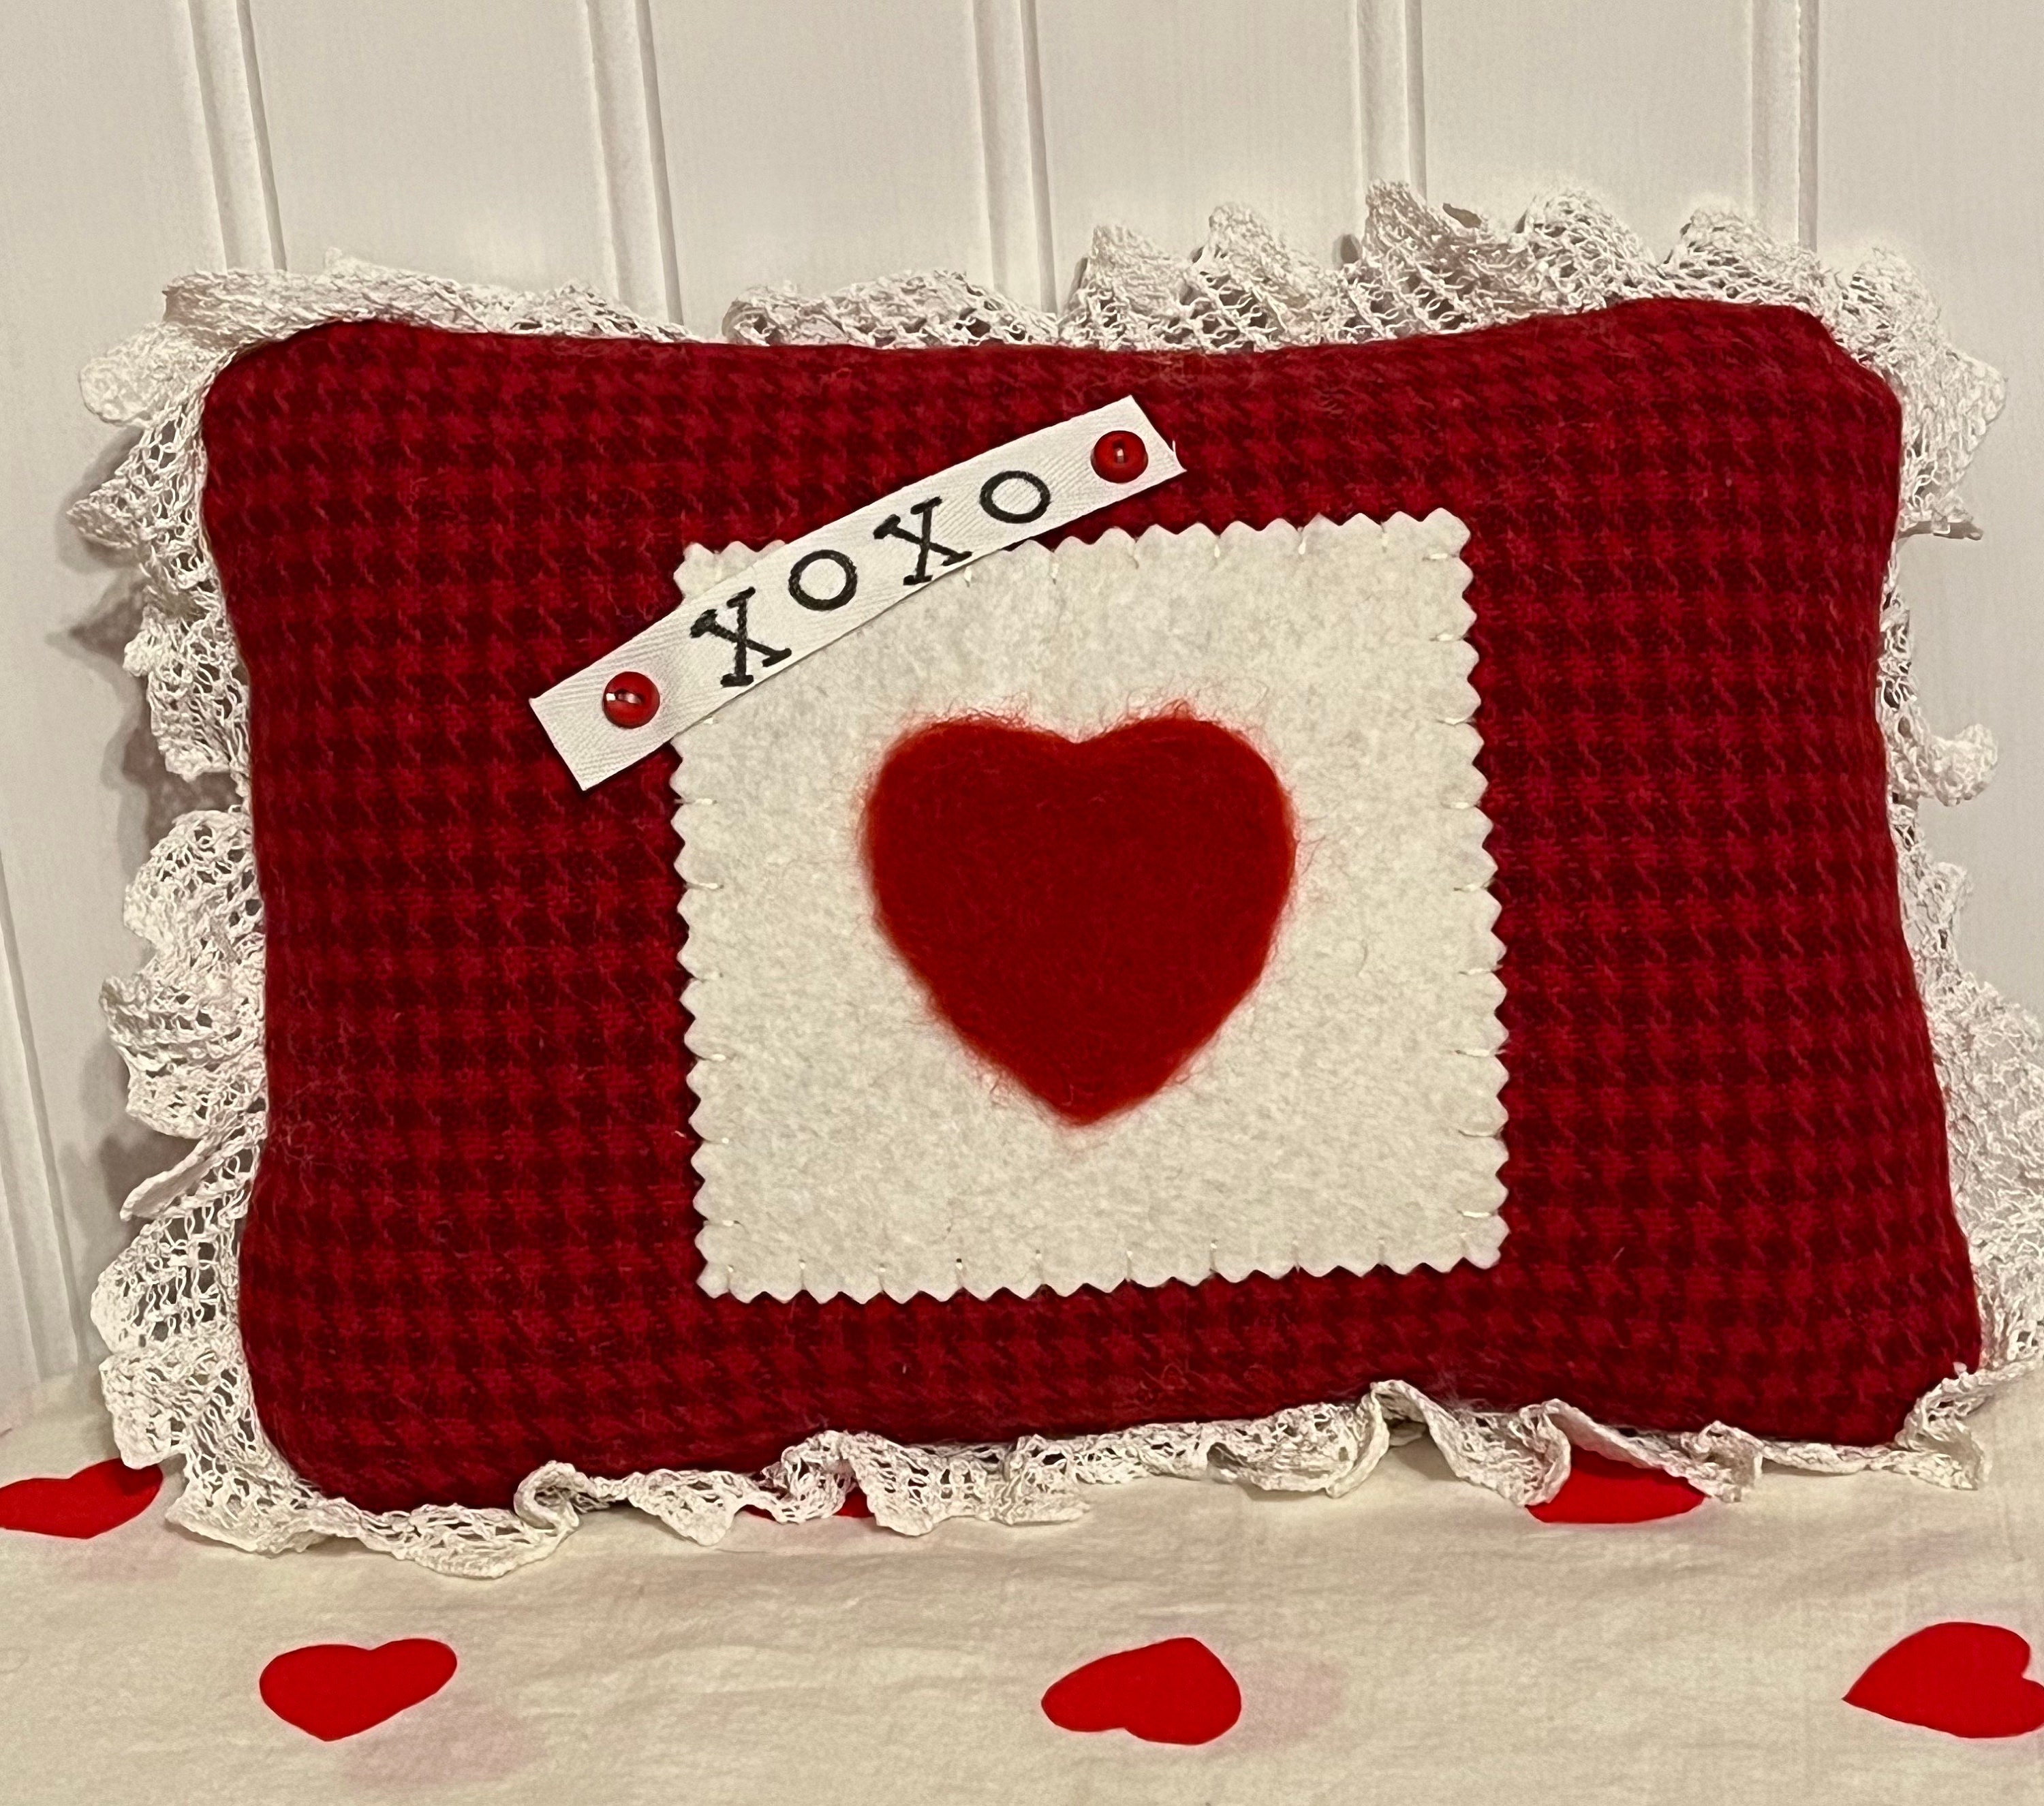 Wool Applique Pattern jacobean Heart Embroidery Pattern Sachet Pin Cushion  Tuck Pillow Pincushion Bowl Filler Felted Hand Dyed Wool Fabric 